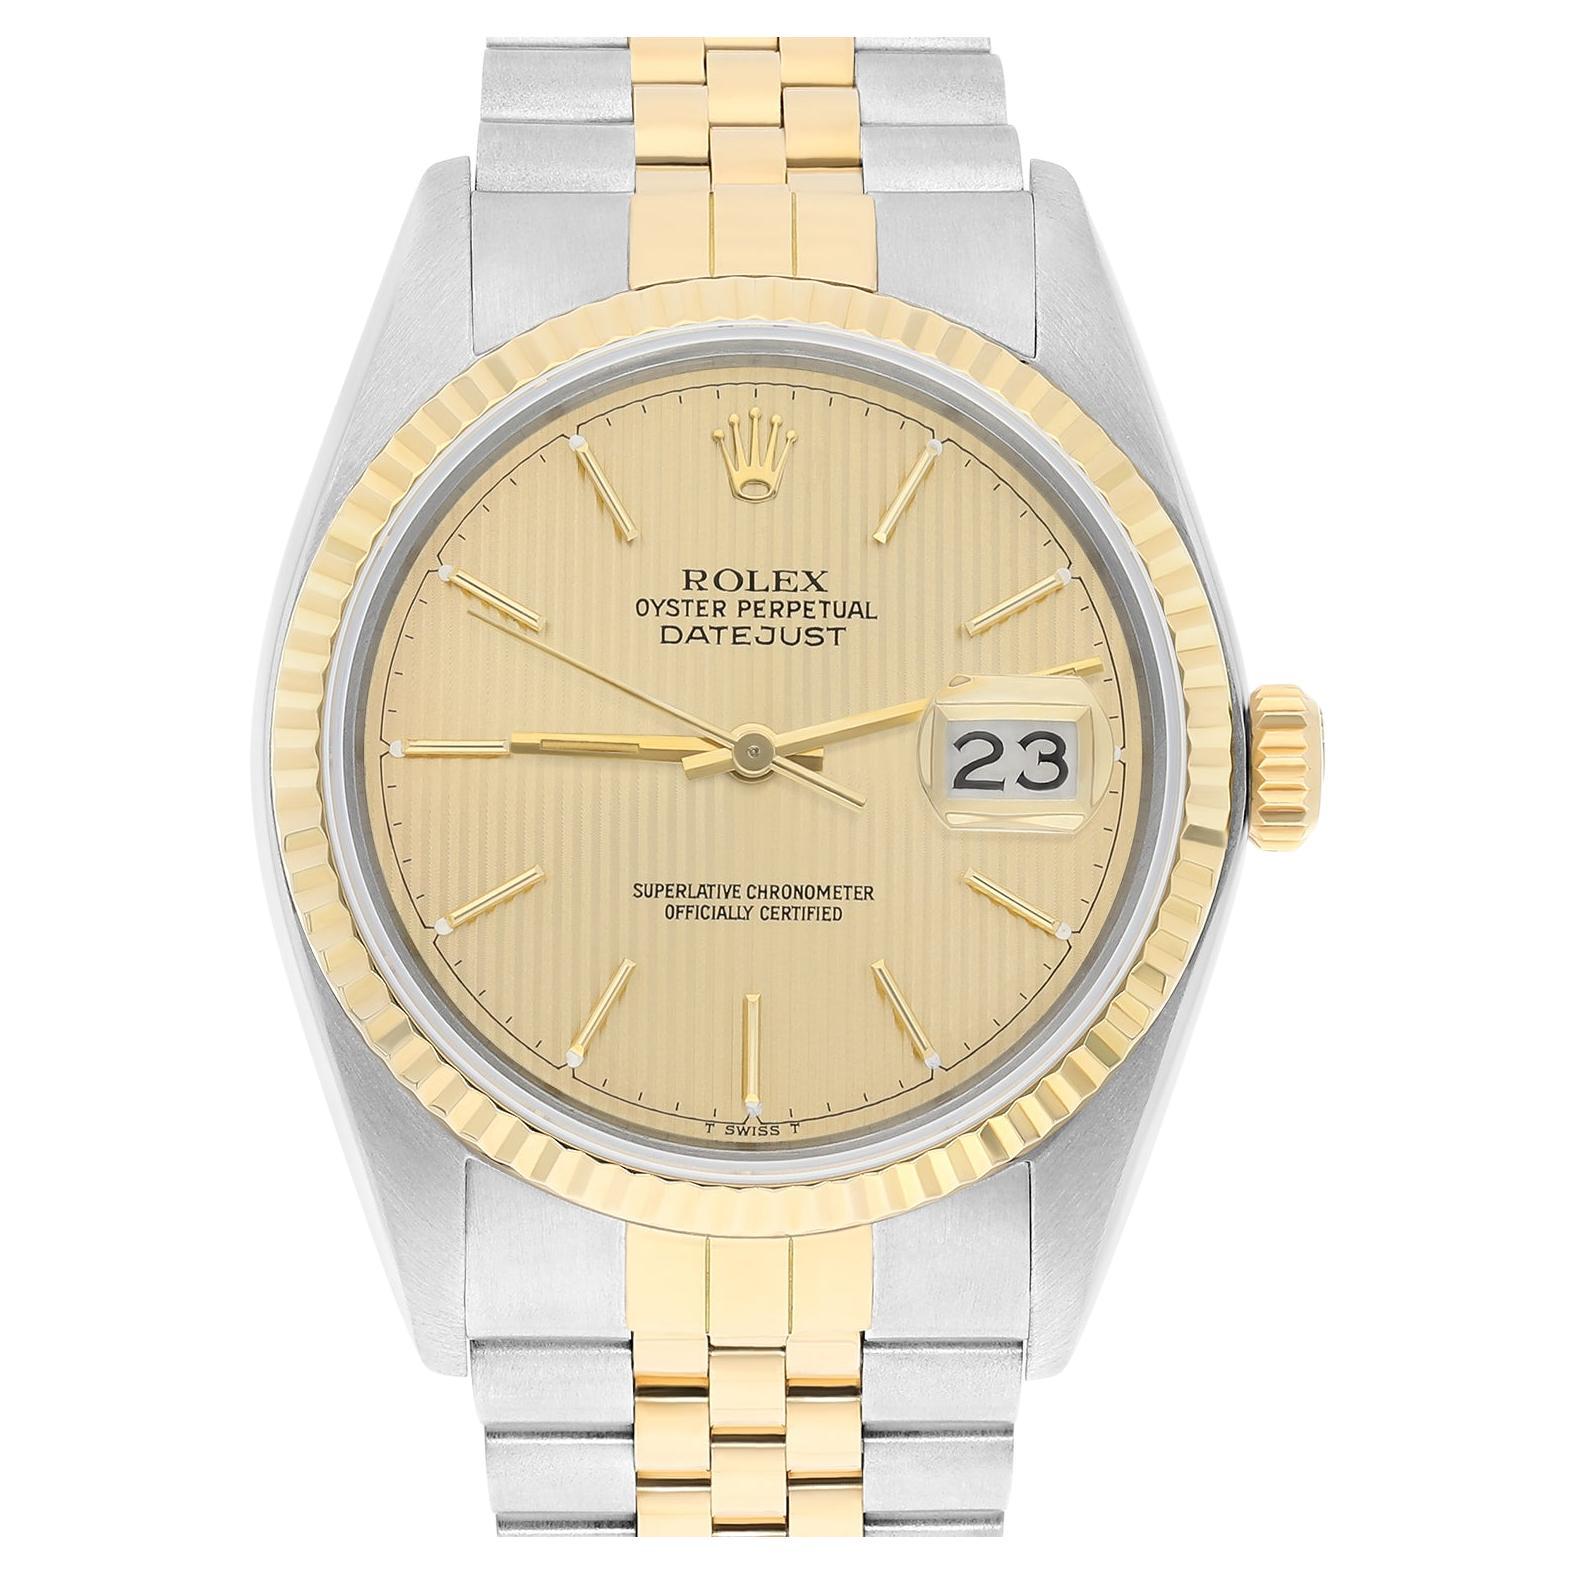 Rolex Datejust 36mm Two Tone Champagne Dial Jubilee 16013 Circa 1988 Papers For Sale